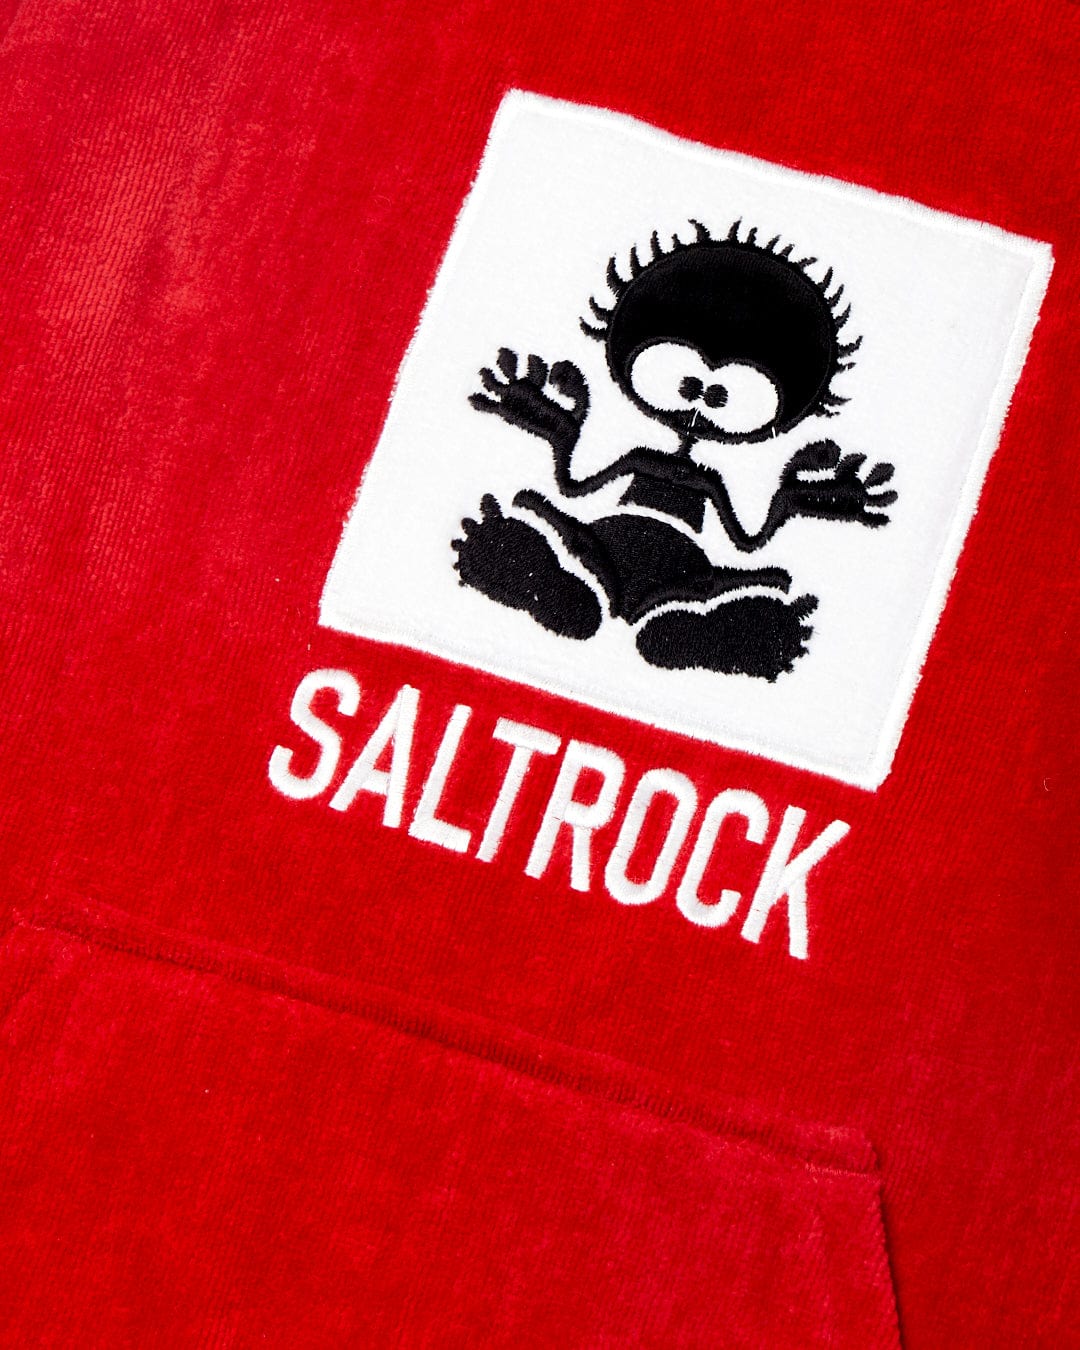 White logo of a stylized sun figure on a red 100% cotton towel background with the word "Saltrock" in white text.